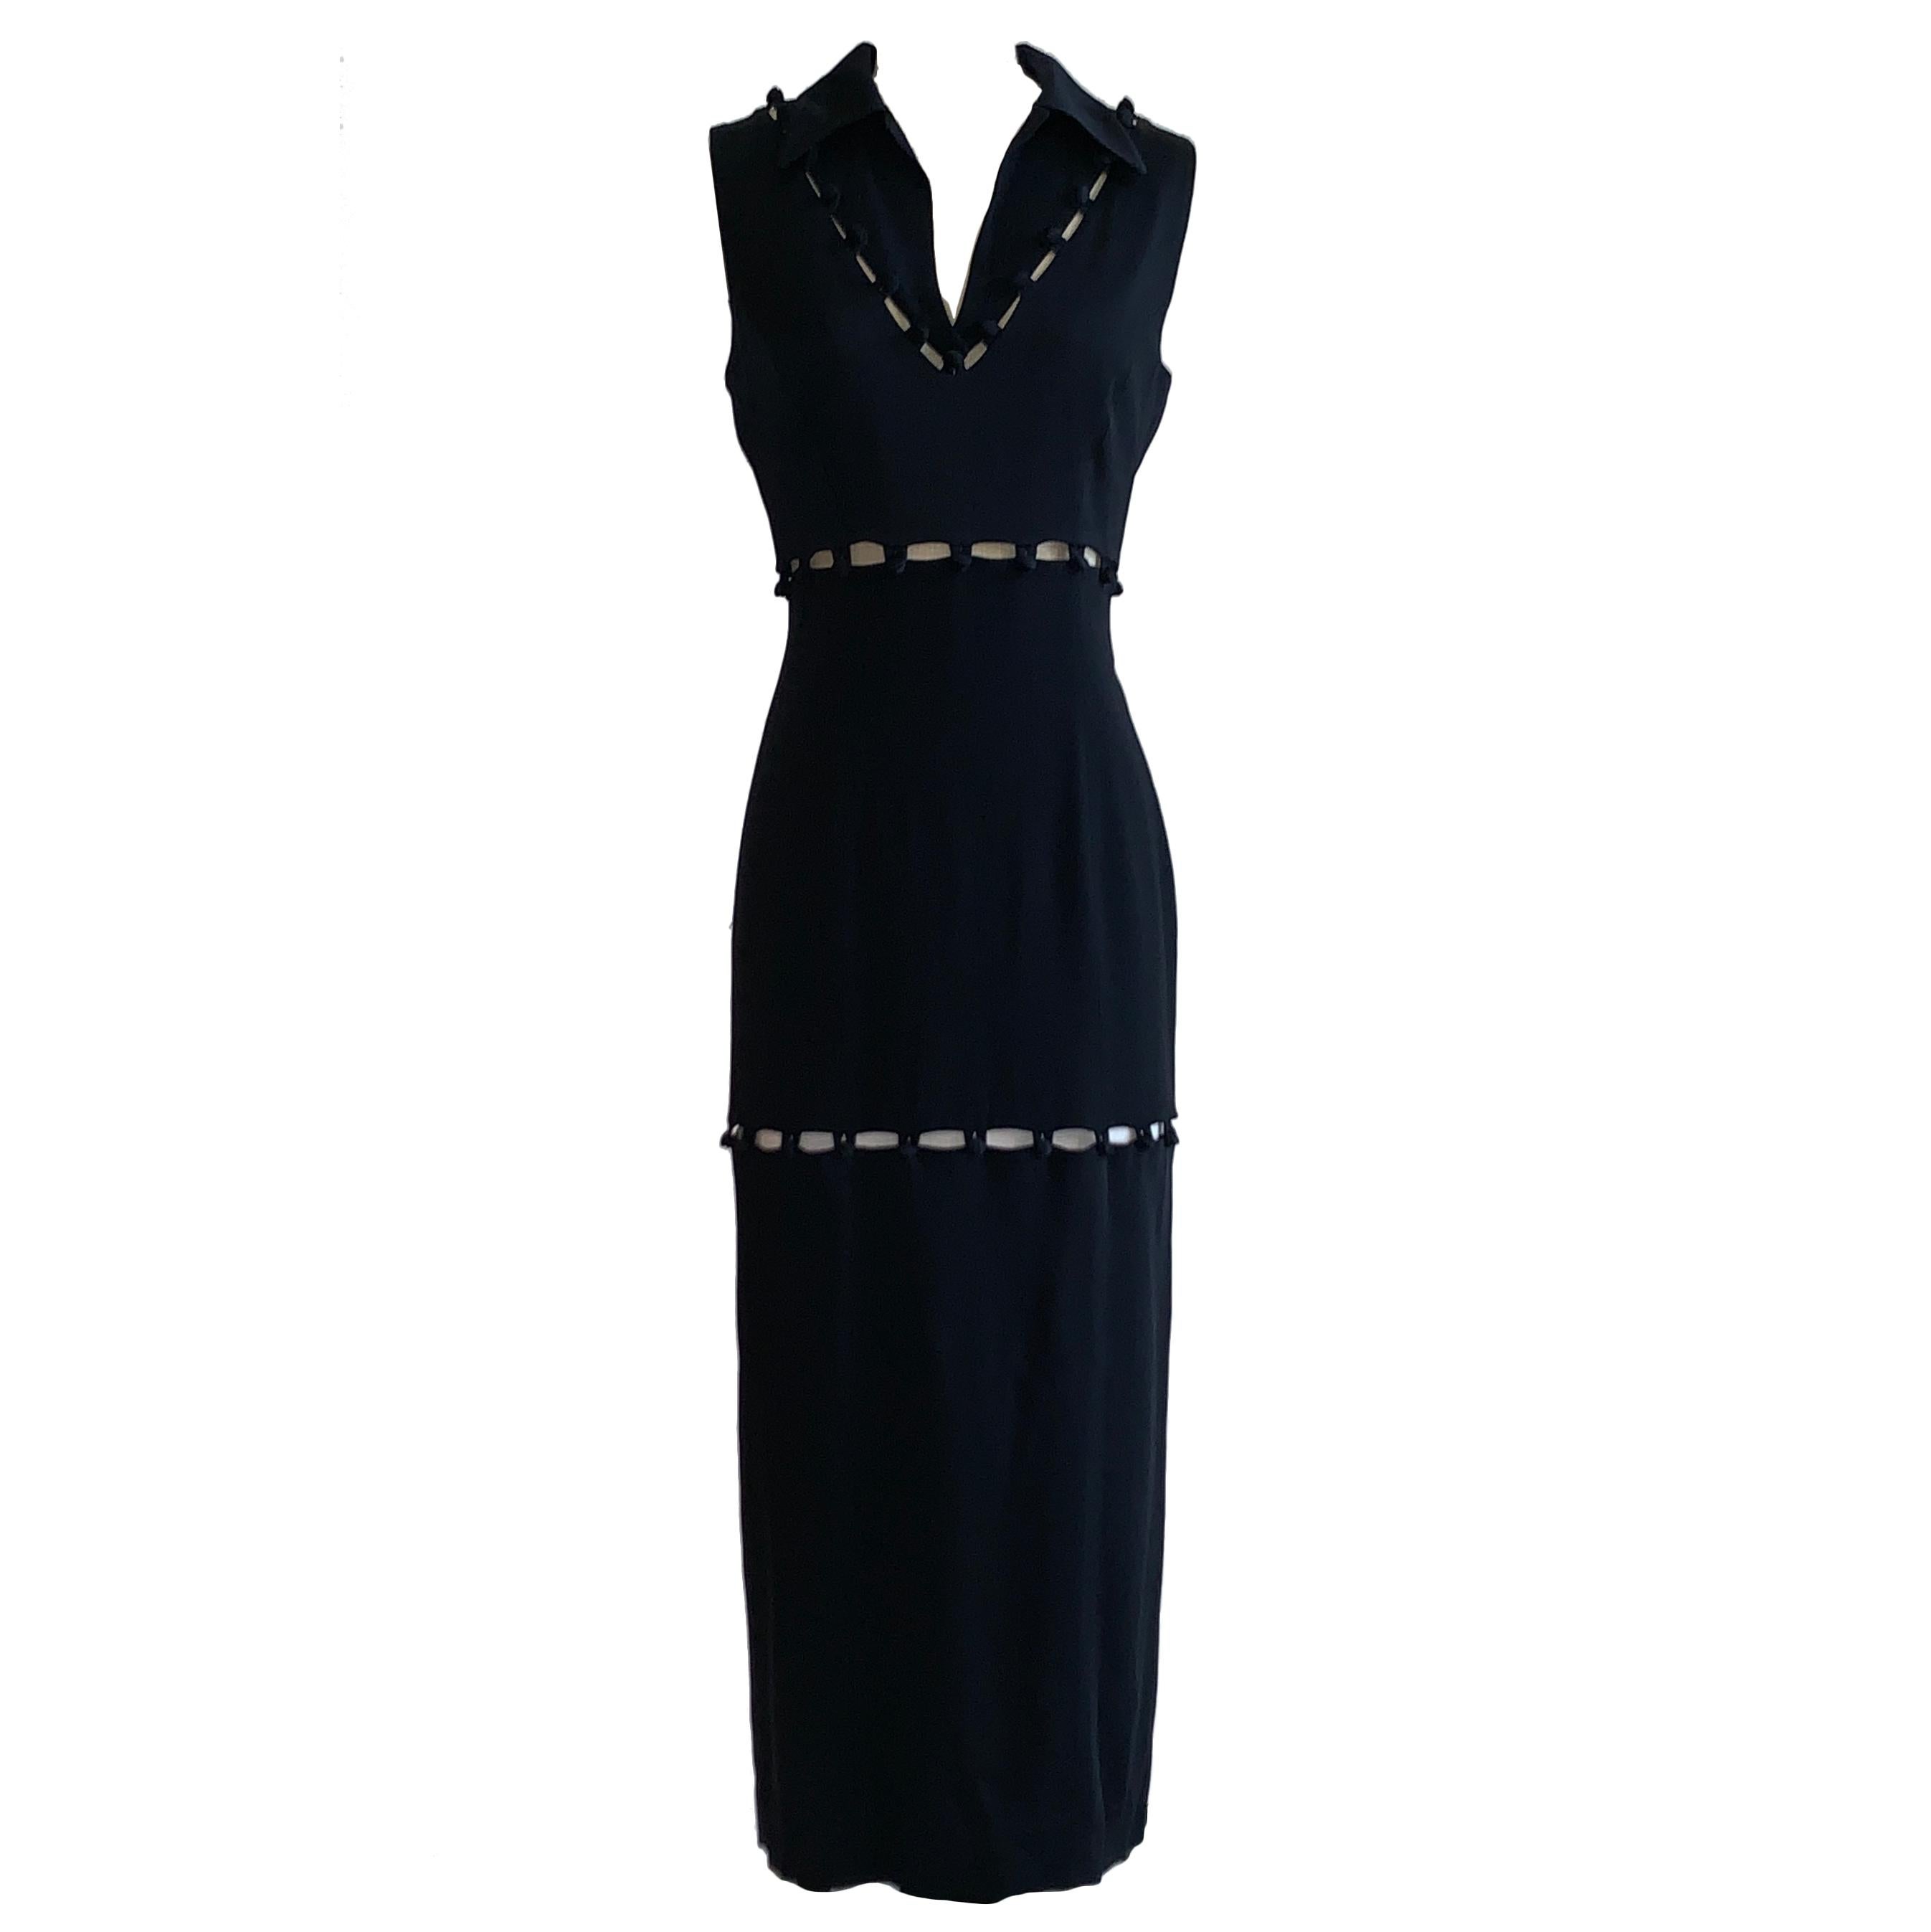 Moschino 1990s Black Convertible Button Off Maxi Dress Gown 